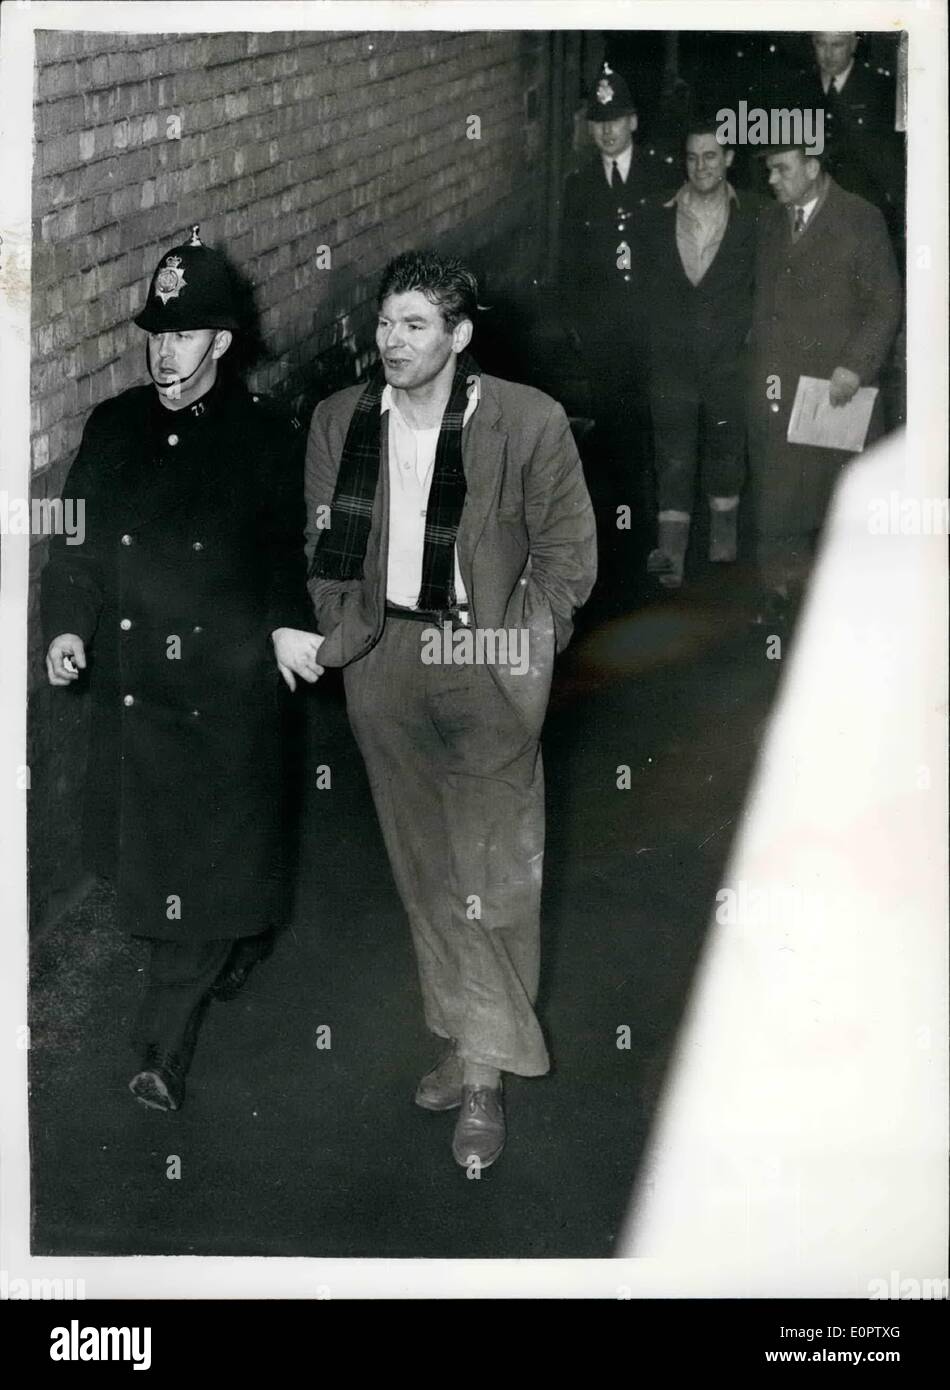 Jan. 01, 1957 - Runaway Mental Patients Captured after Sixty Five Hours of Freedom... The two mental patients who escaped on Friday from Rampton Institute, Notts., were captured yesterday after sixty five hours of freedom. The two men 27 year old Frank Ellis and 19 year old Richard Maskill broke into the home of 44 year old Mrs. Marjorie Wagner at Weston on Trent... They made Mrs. Wagner supply them with a meal - she managed to raise the alarm - the two men made getaway but they were caught and overpowered at a garage just North of Newark.. Stock Photo